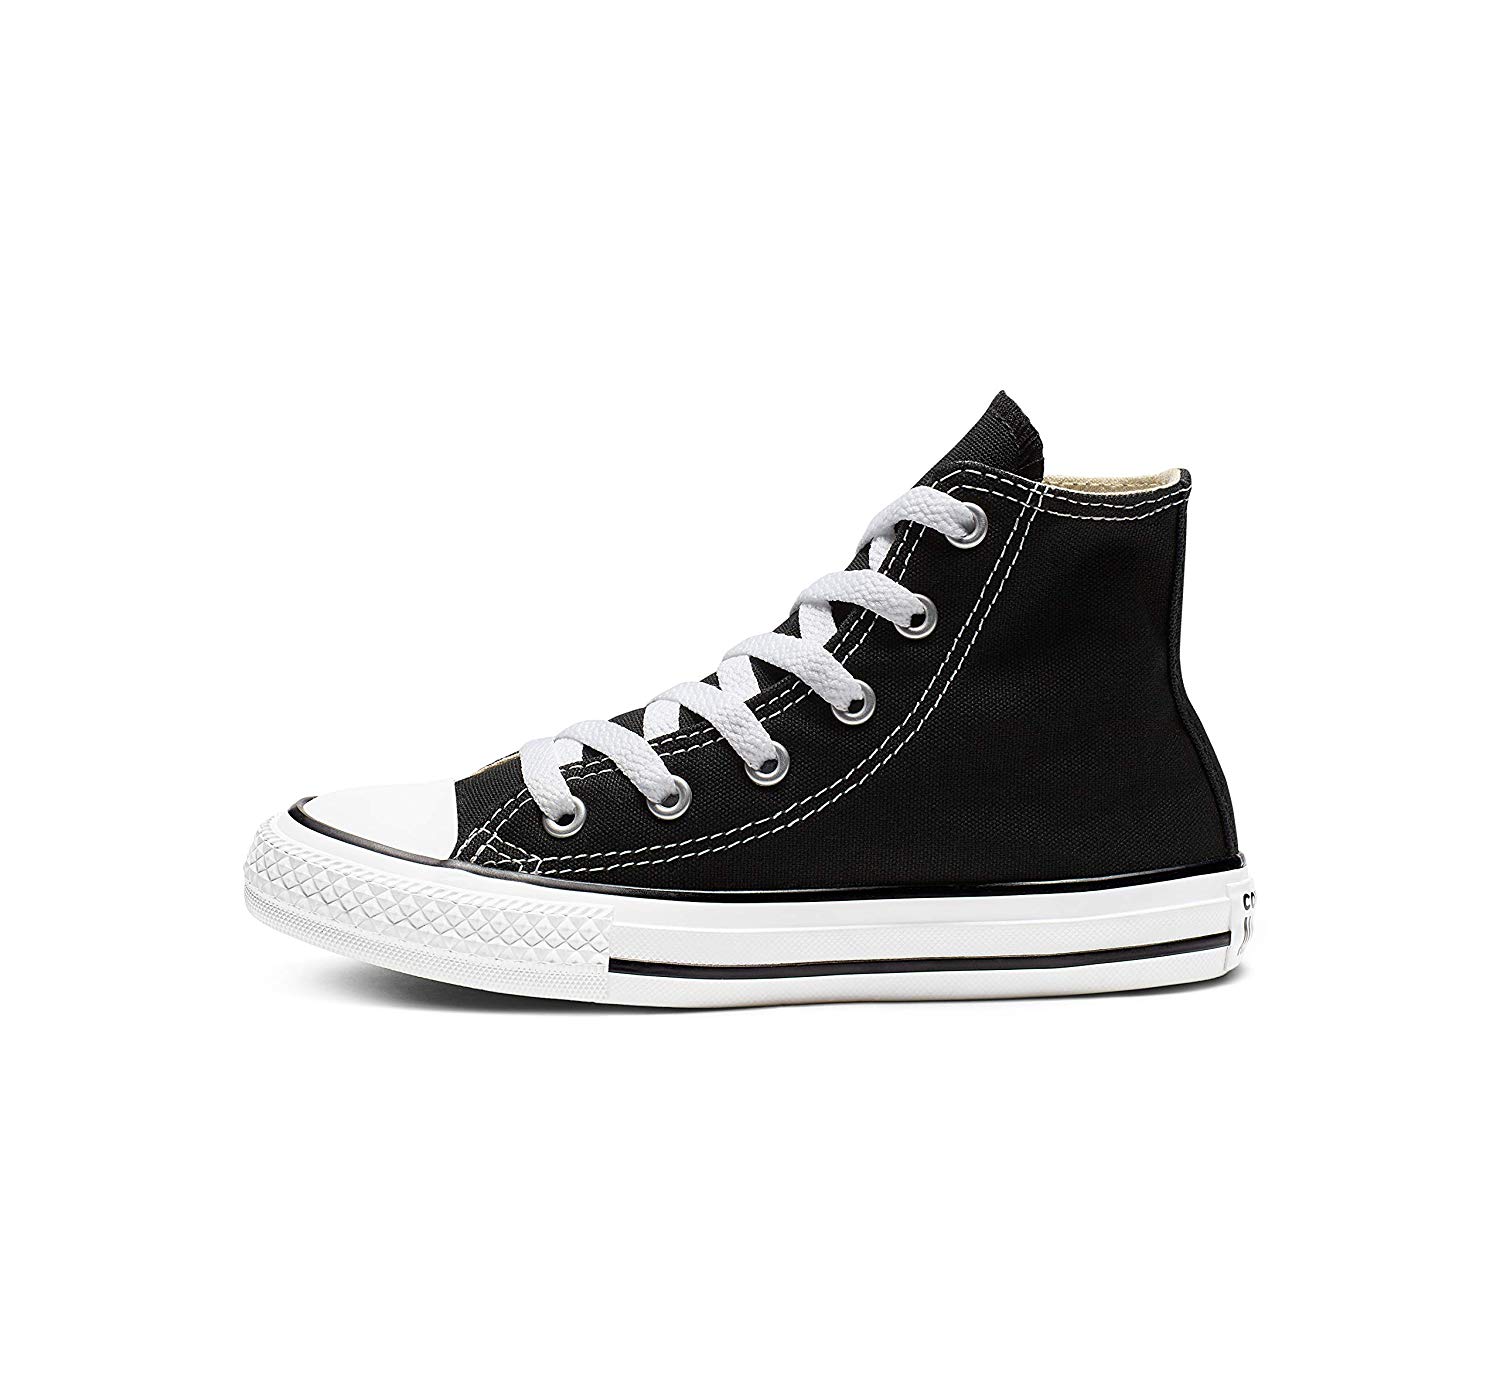 Converse Baby chuck taylor all star infant Canvas Lace Up, Black, Size ...